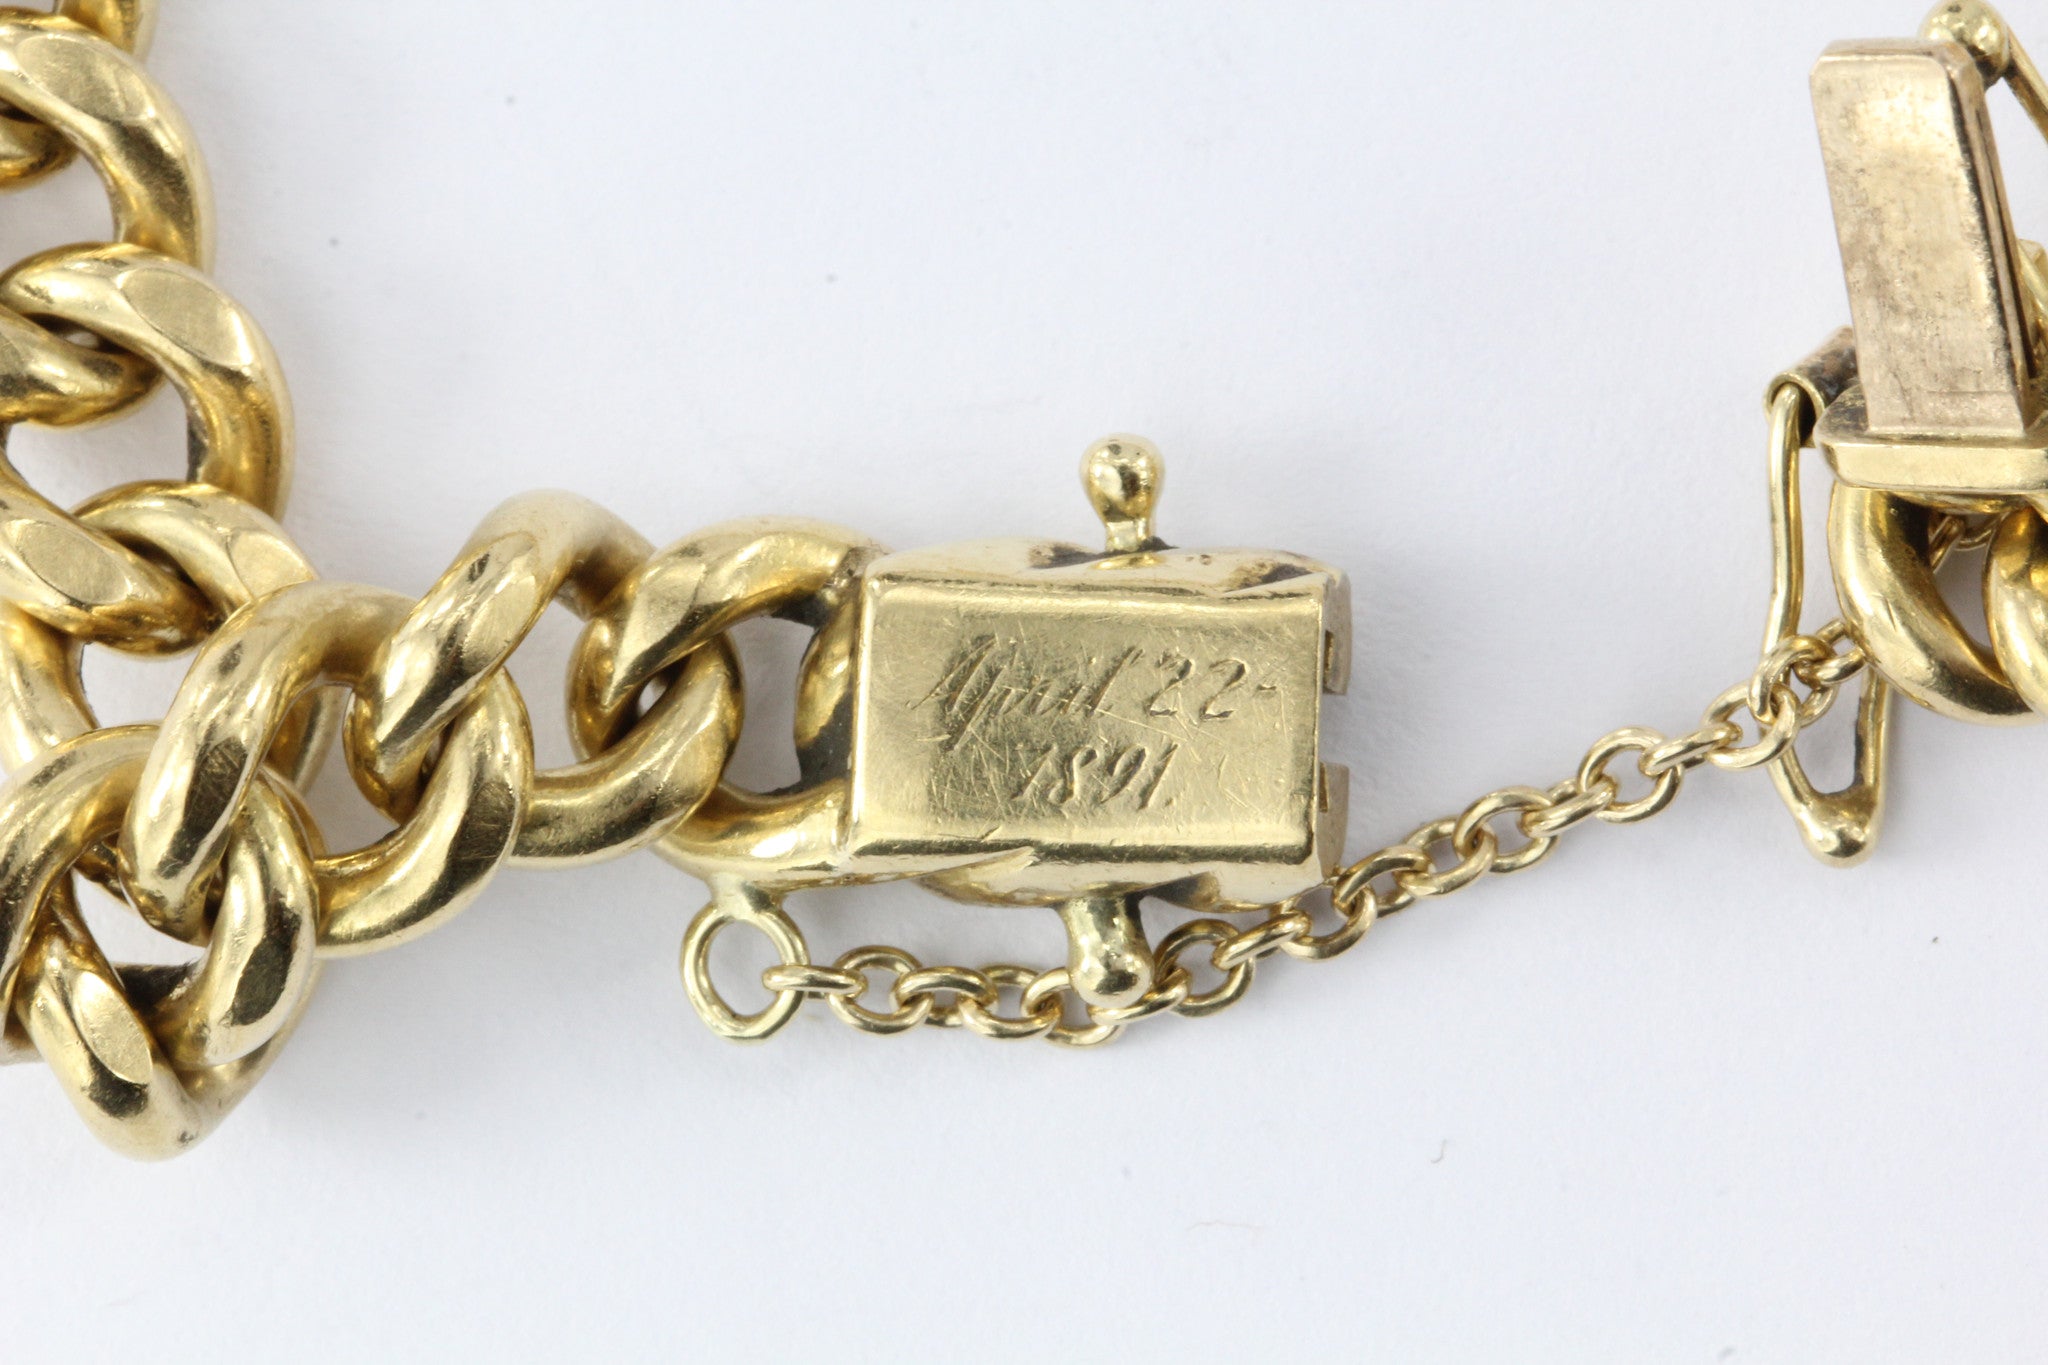 Antique Victorian Tiffany & Co 18K Gold Bracelet Dated 1891 – QUEEN MAY